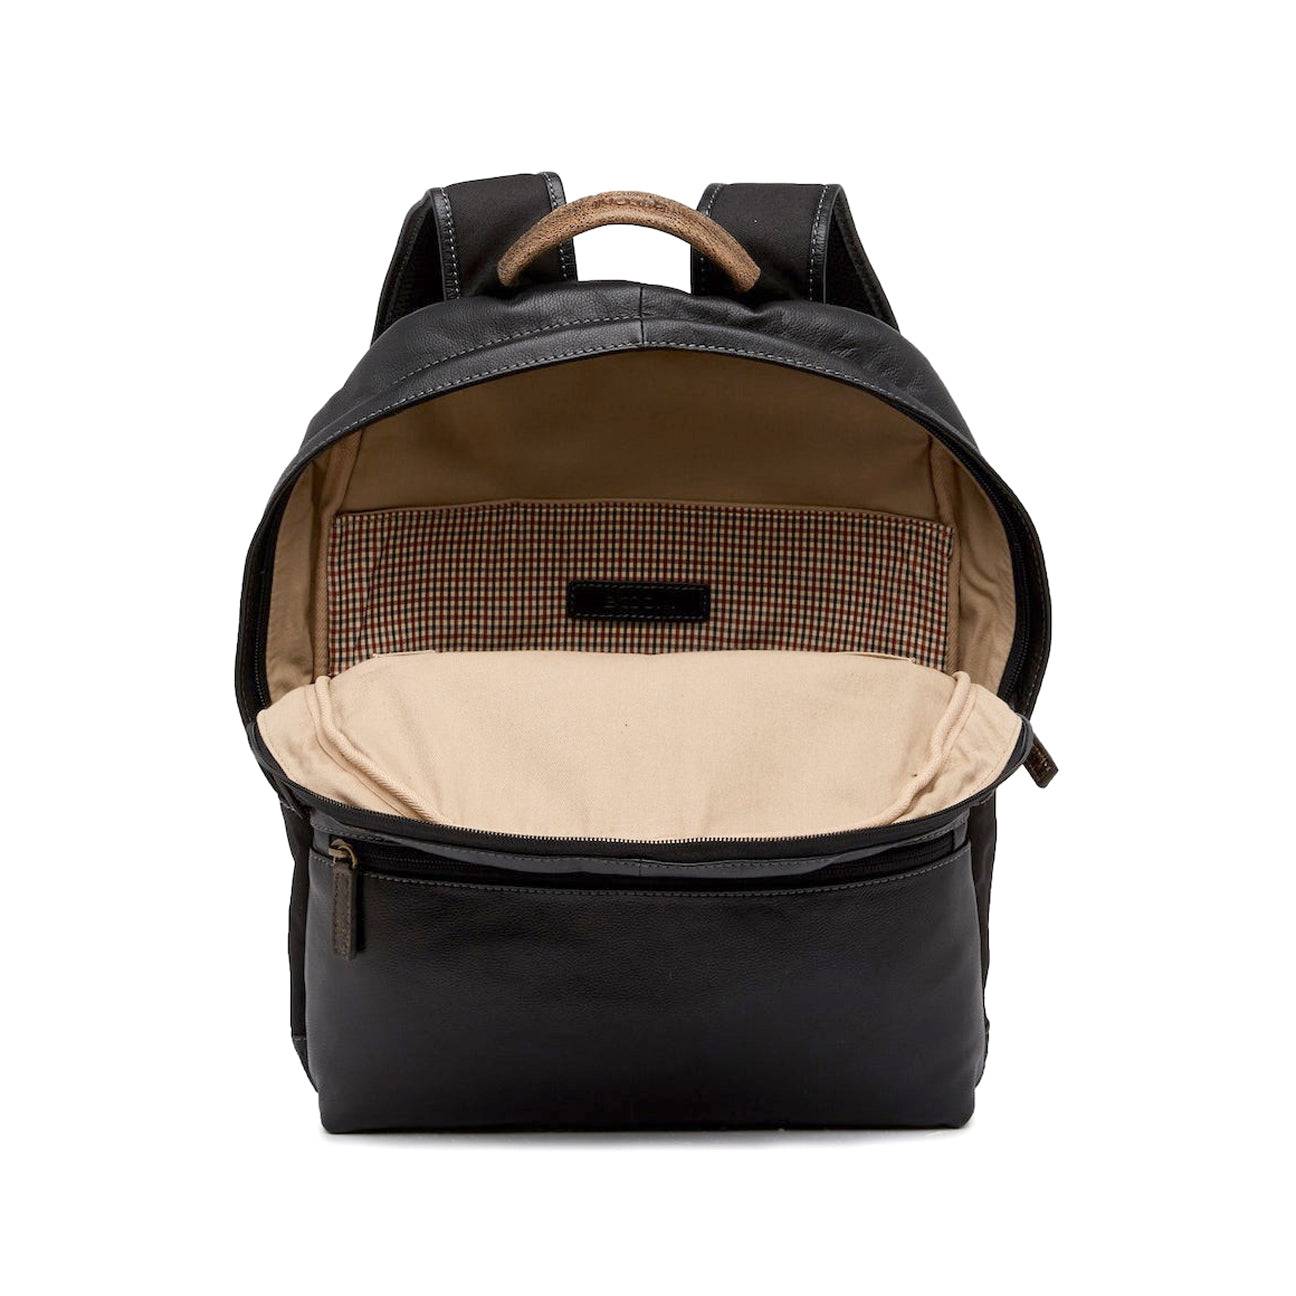 12 Best Leather Backpacks to Carry to Class and Work | Teen Vogue